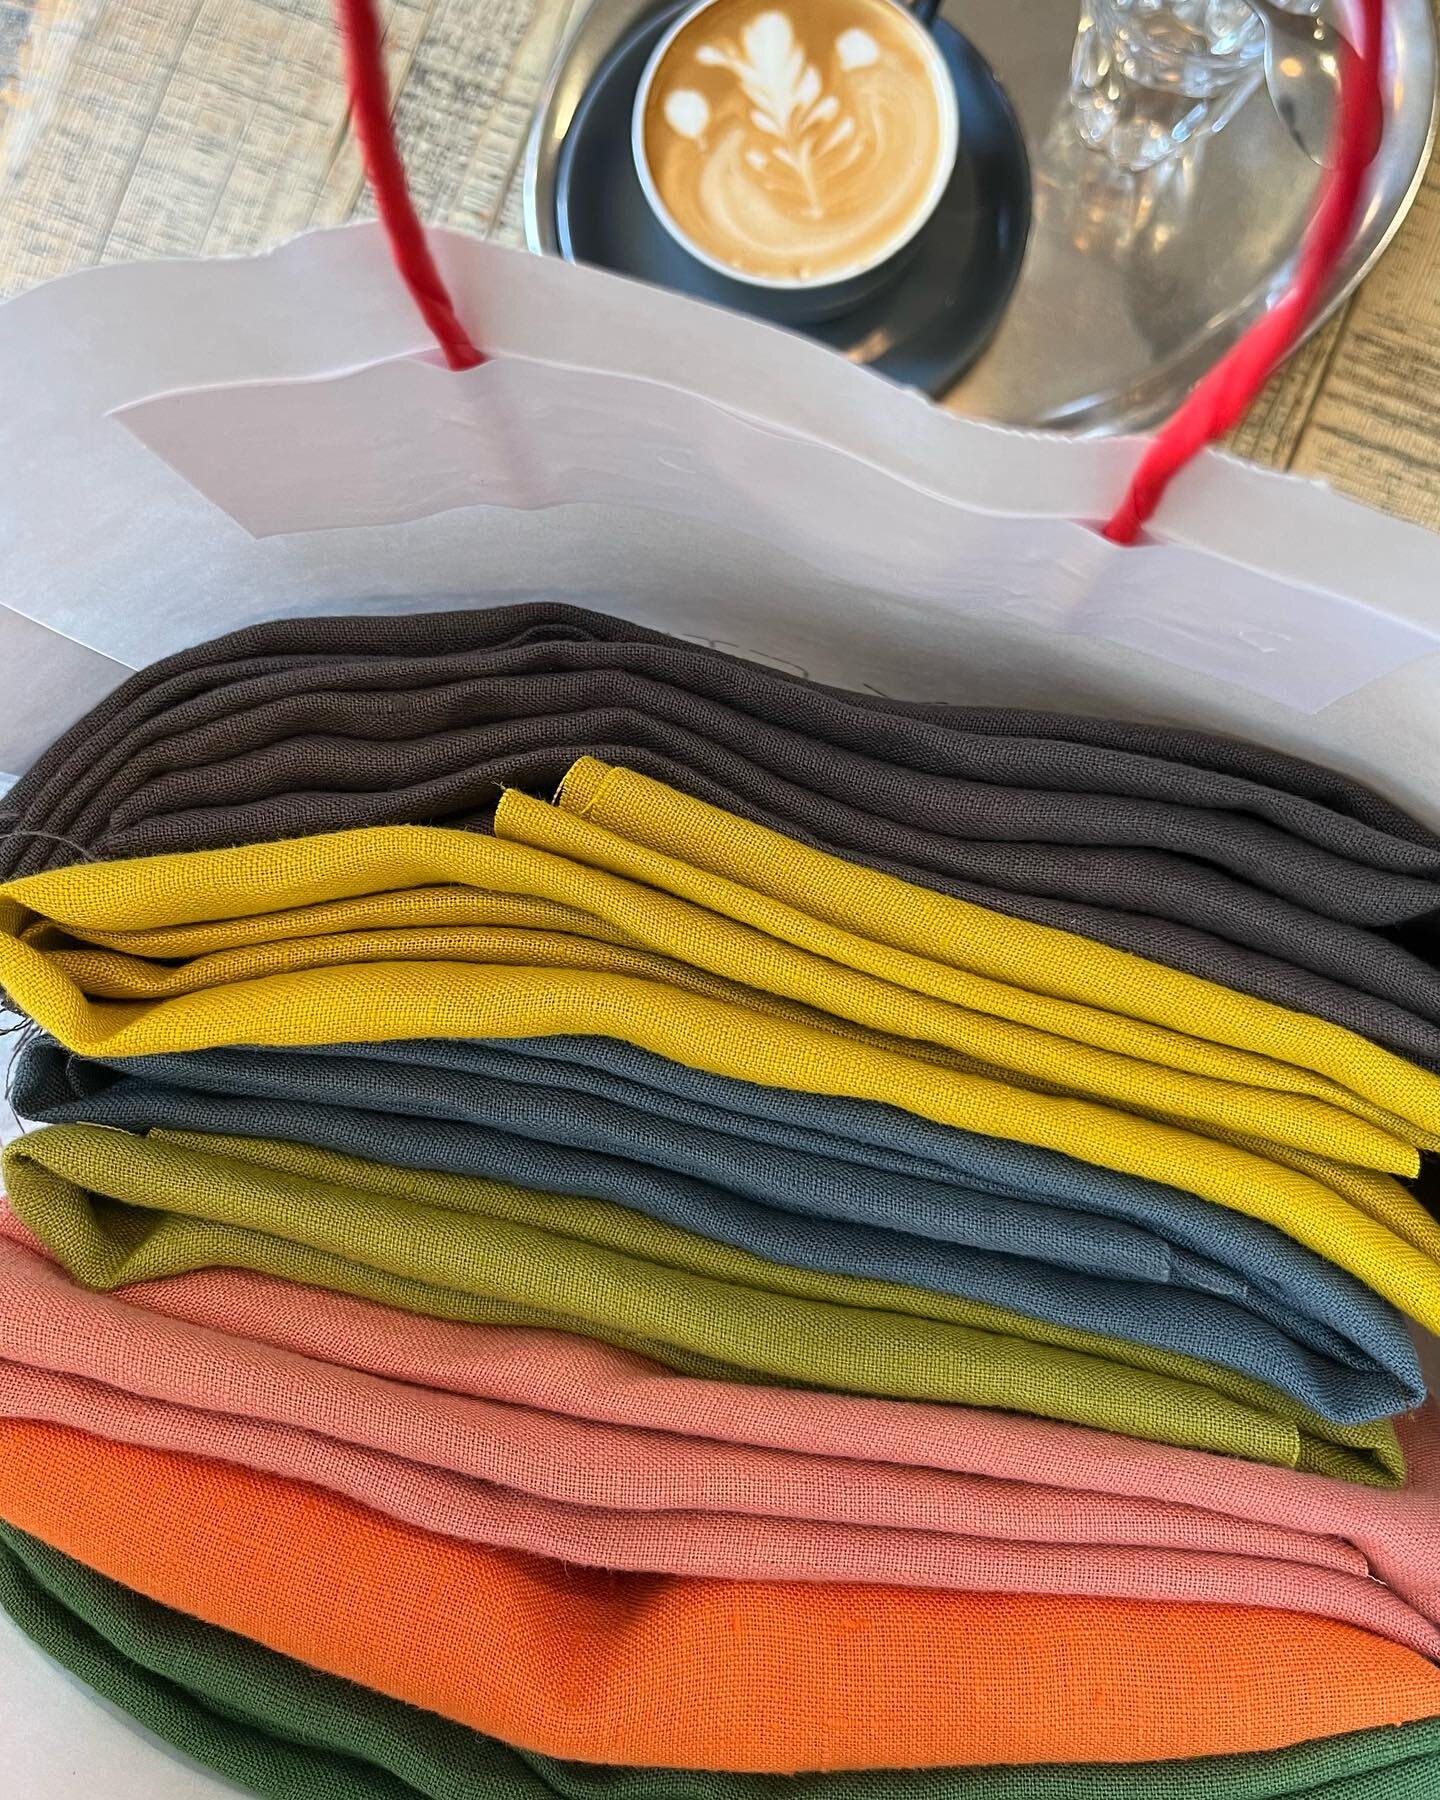 Having a coffee in Kipferl and pondering on the future of these beautiful linen fabrics from Ray Stitch. 

Went in to restock some old favourites and found three new colours that just insisted on coming home with me! Shamrock, Popsicle and Old Rose. 